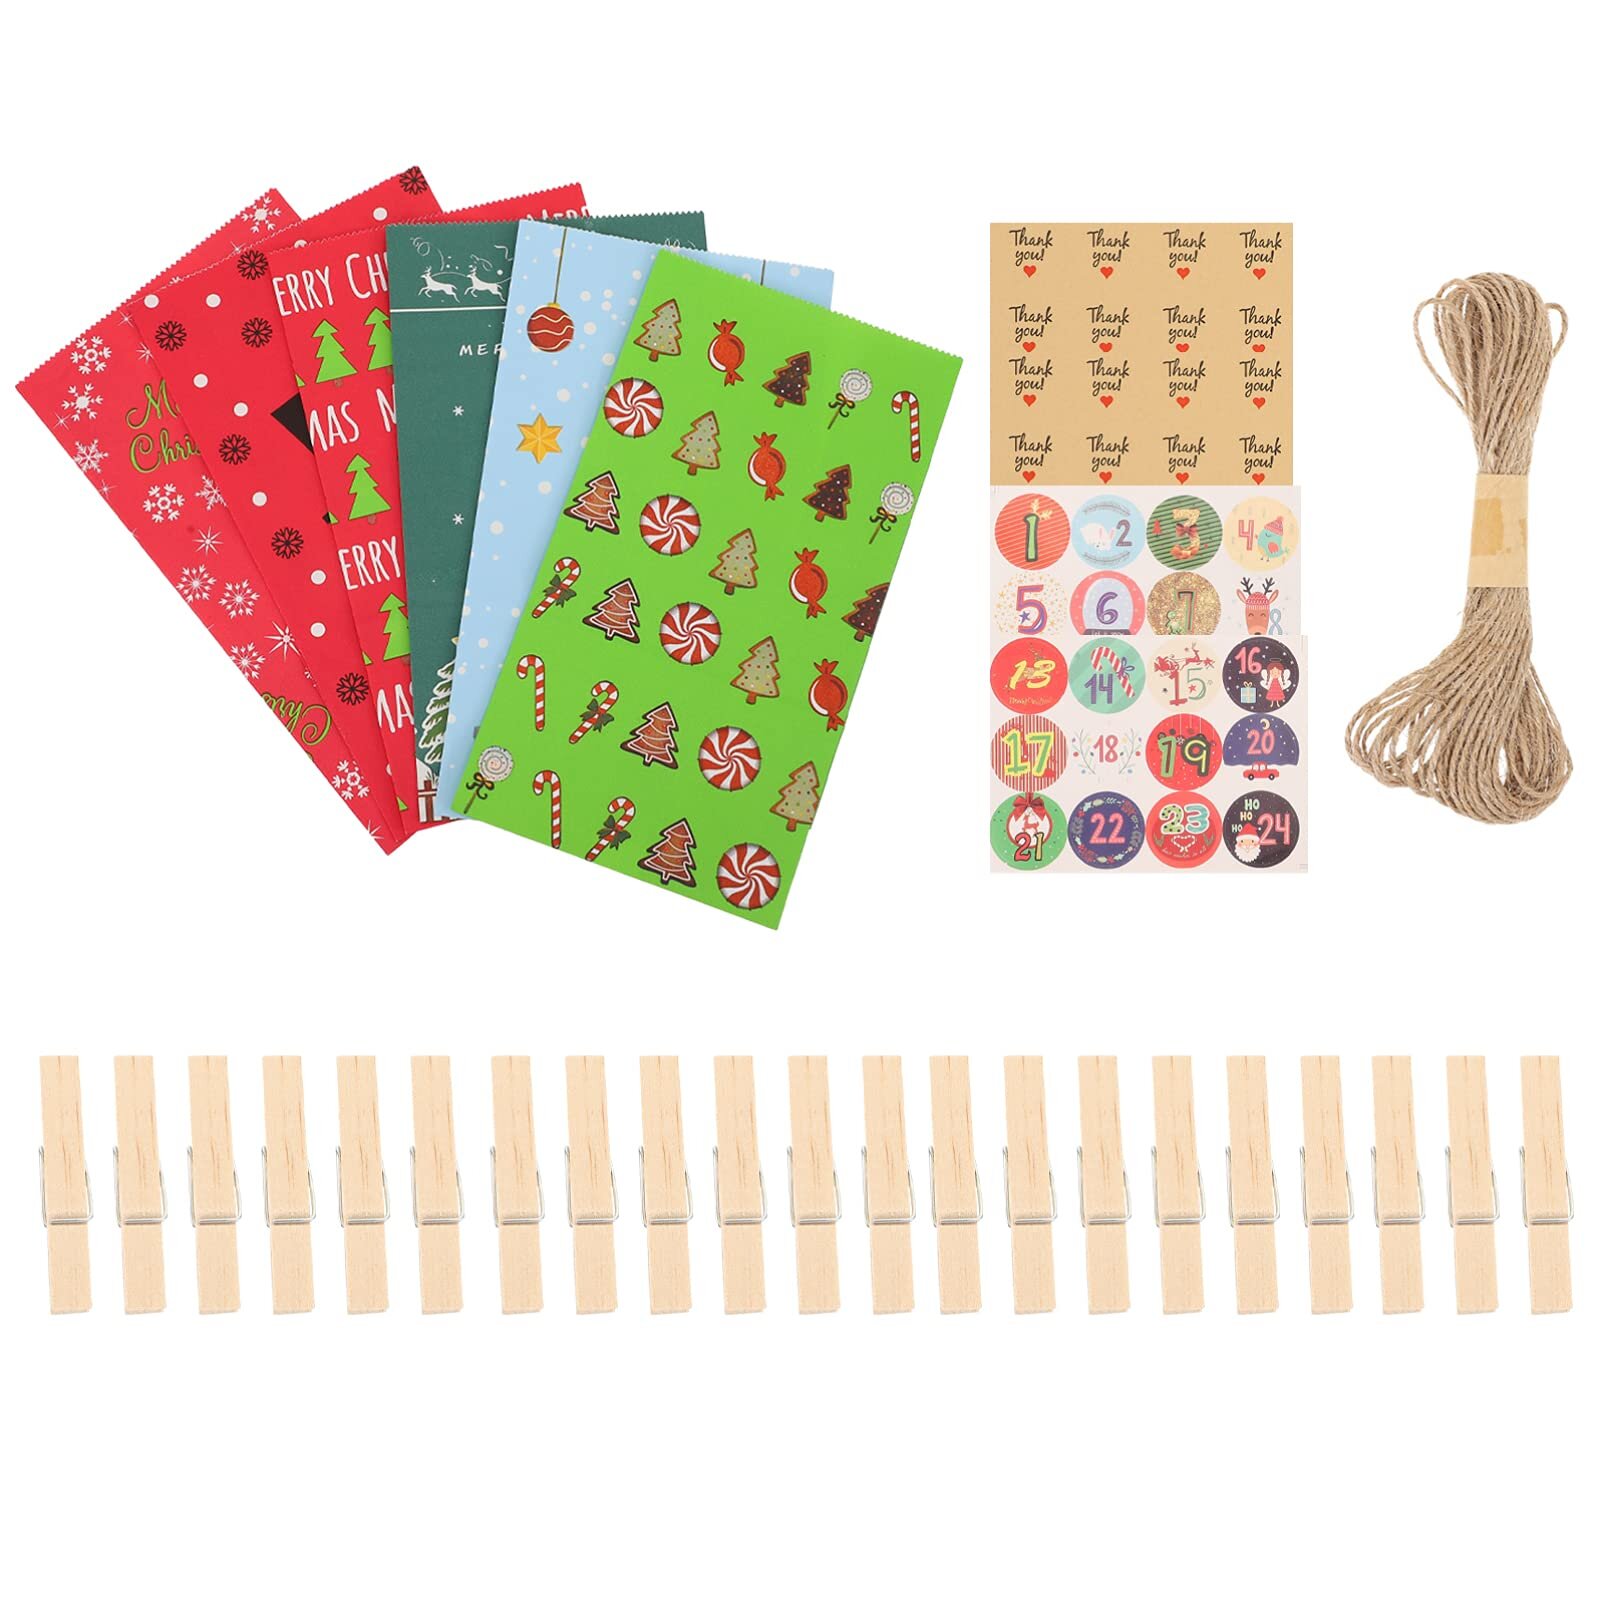 Numbers 1-24 per sheet Advent Calendar Countdown Christmas Labels Stickers 